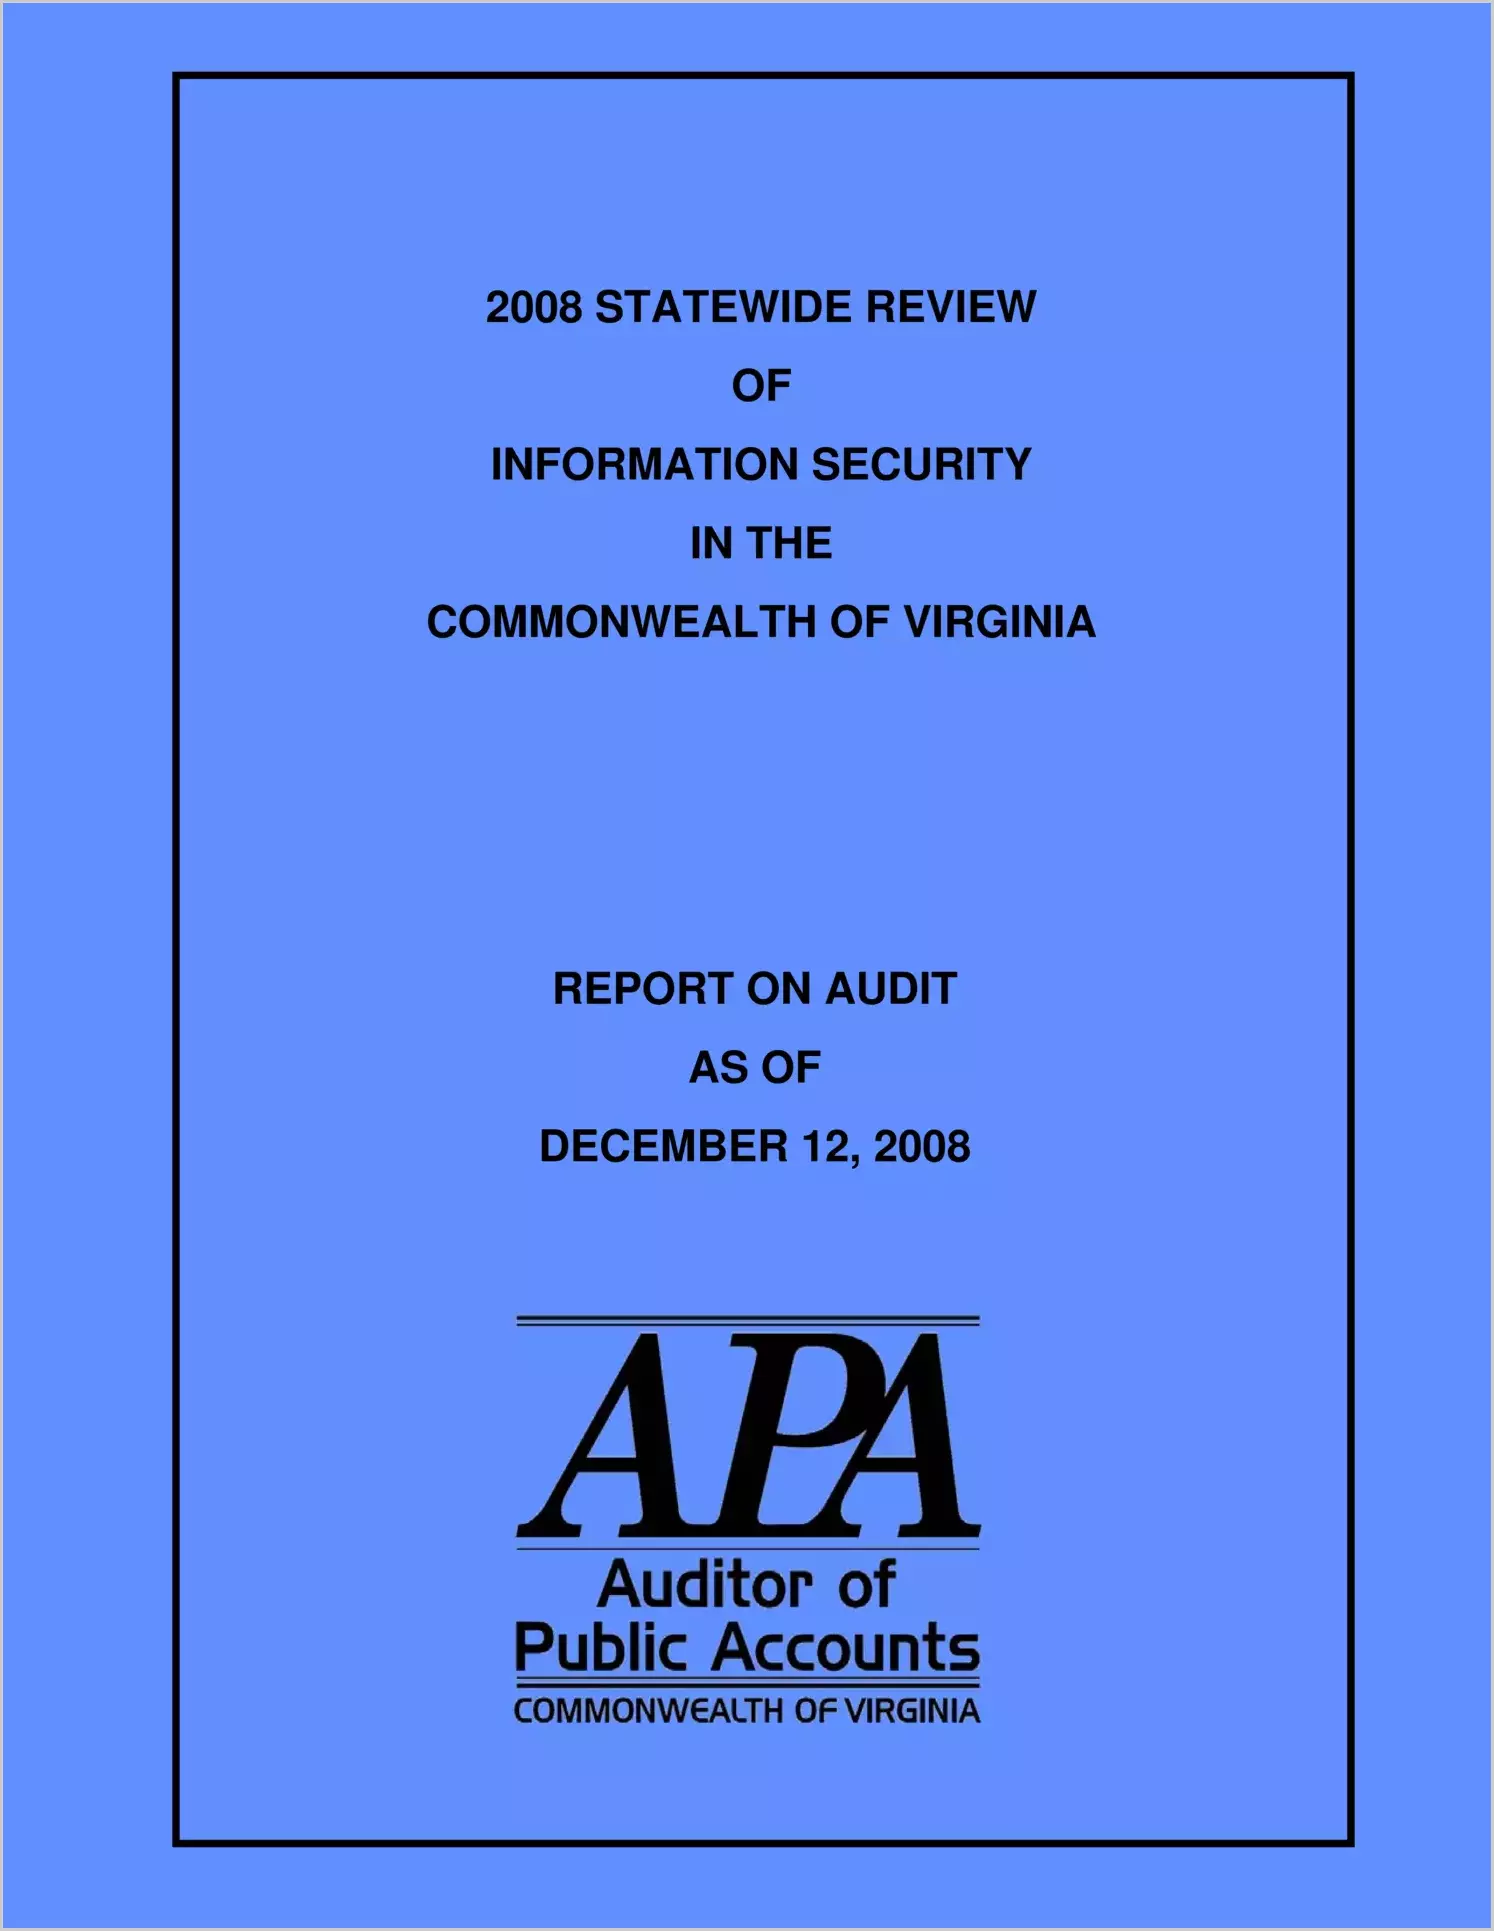 2008 Statewide Review of Information Security in the Commonwealth of Virginia as of December 12, 2008